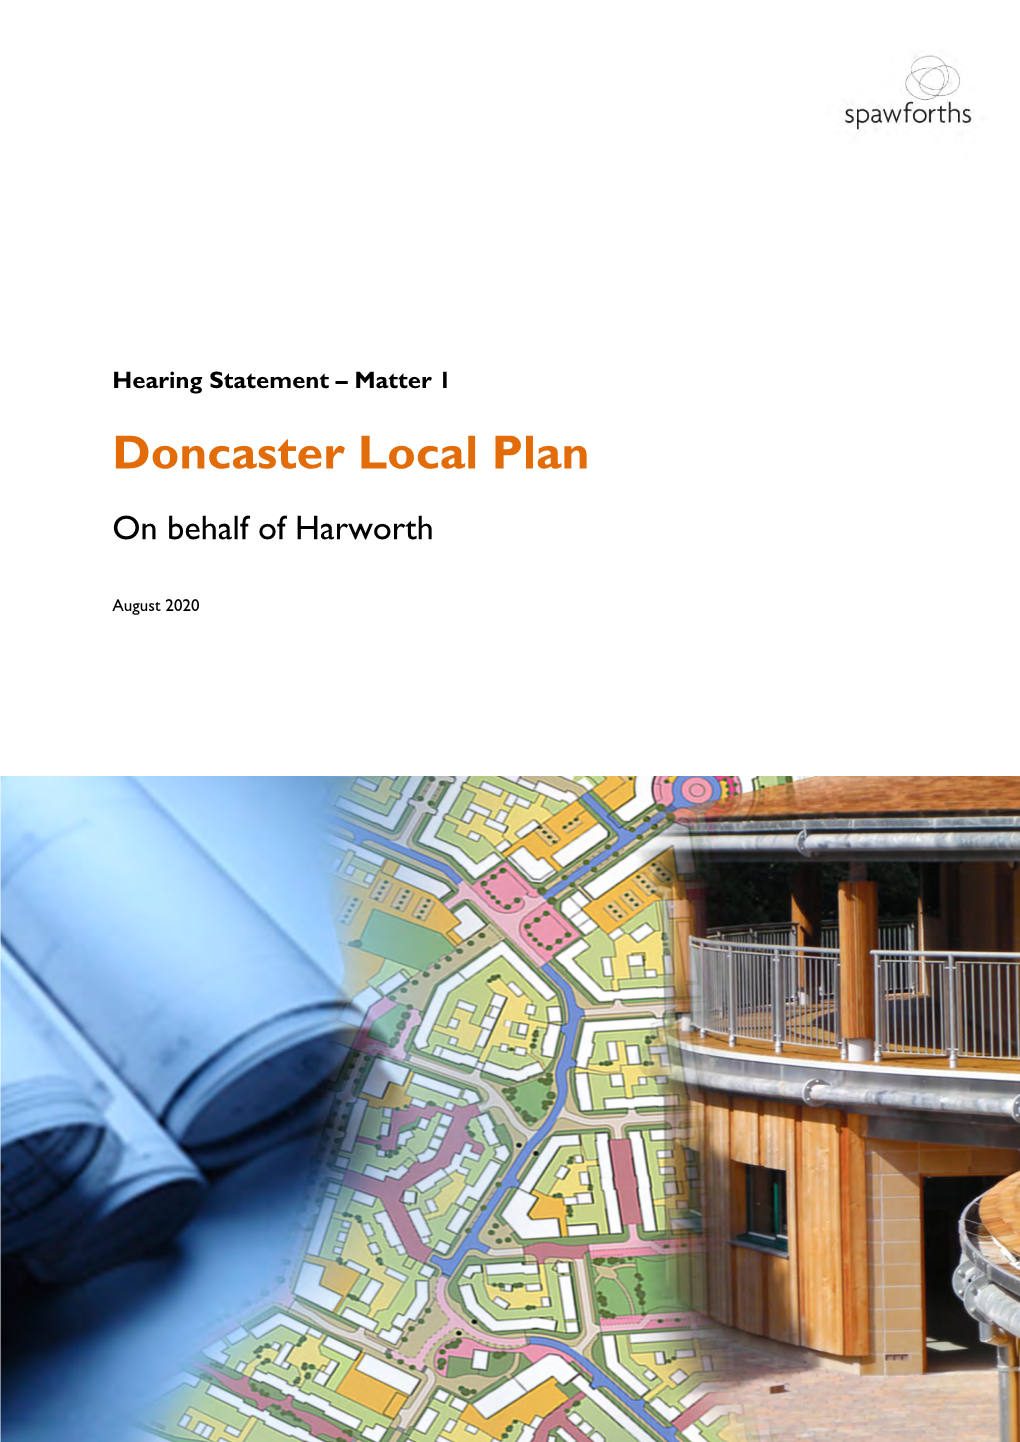 Doncaster Local Plan on Behalf of Harworth